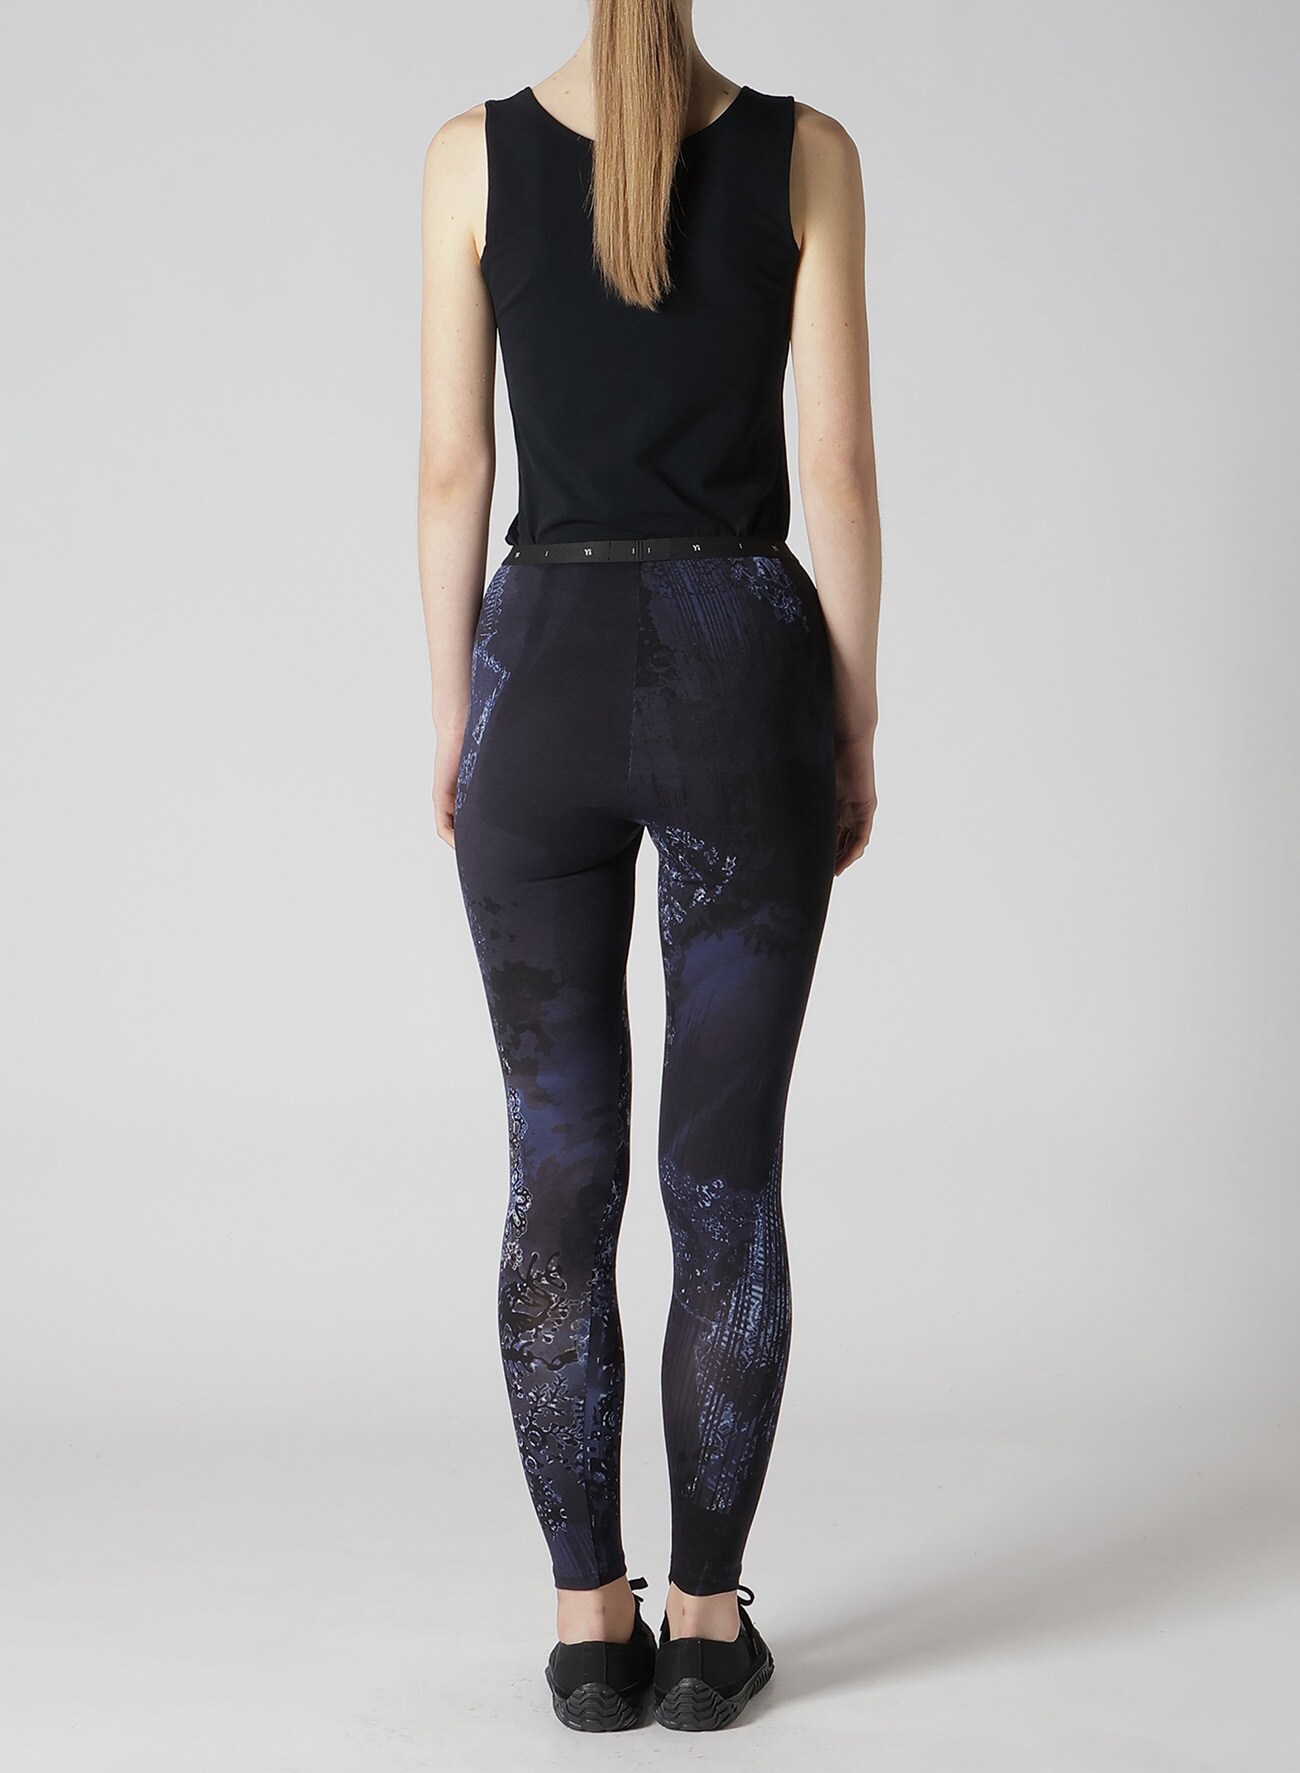 【8/2 12:00(JST) Release】40/-RY JERSEY LACE DESIGN P LEGGINGS